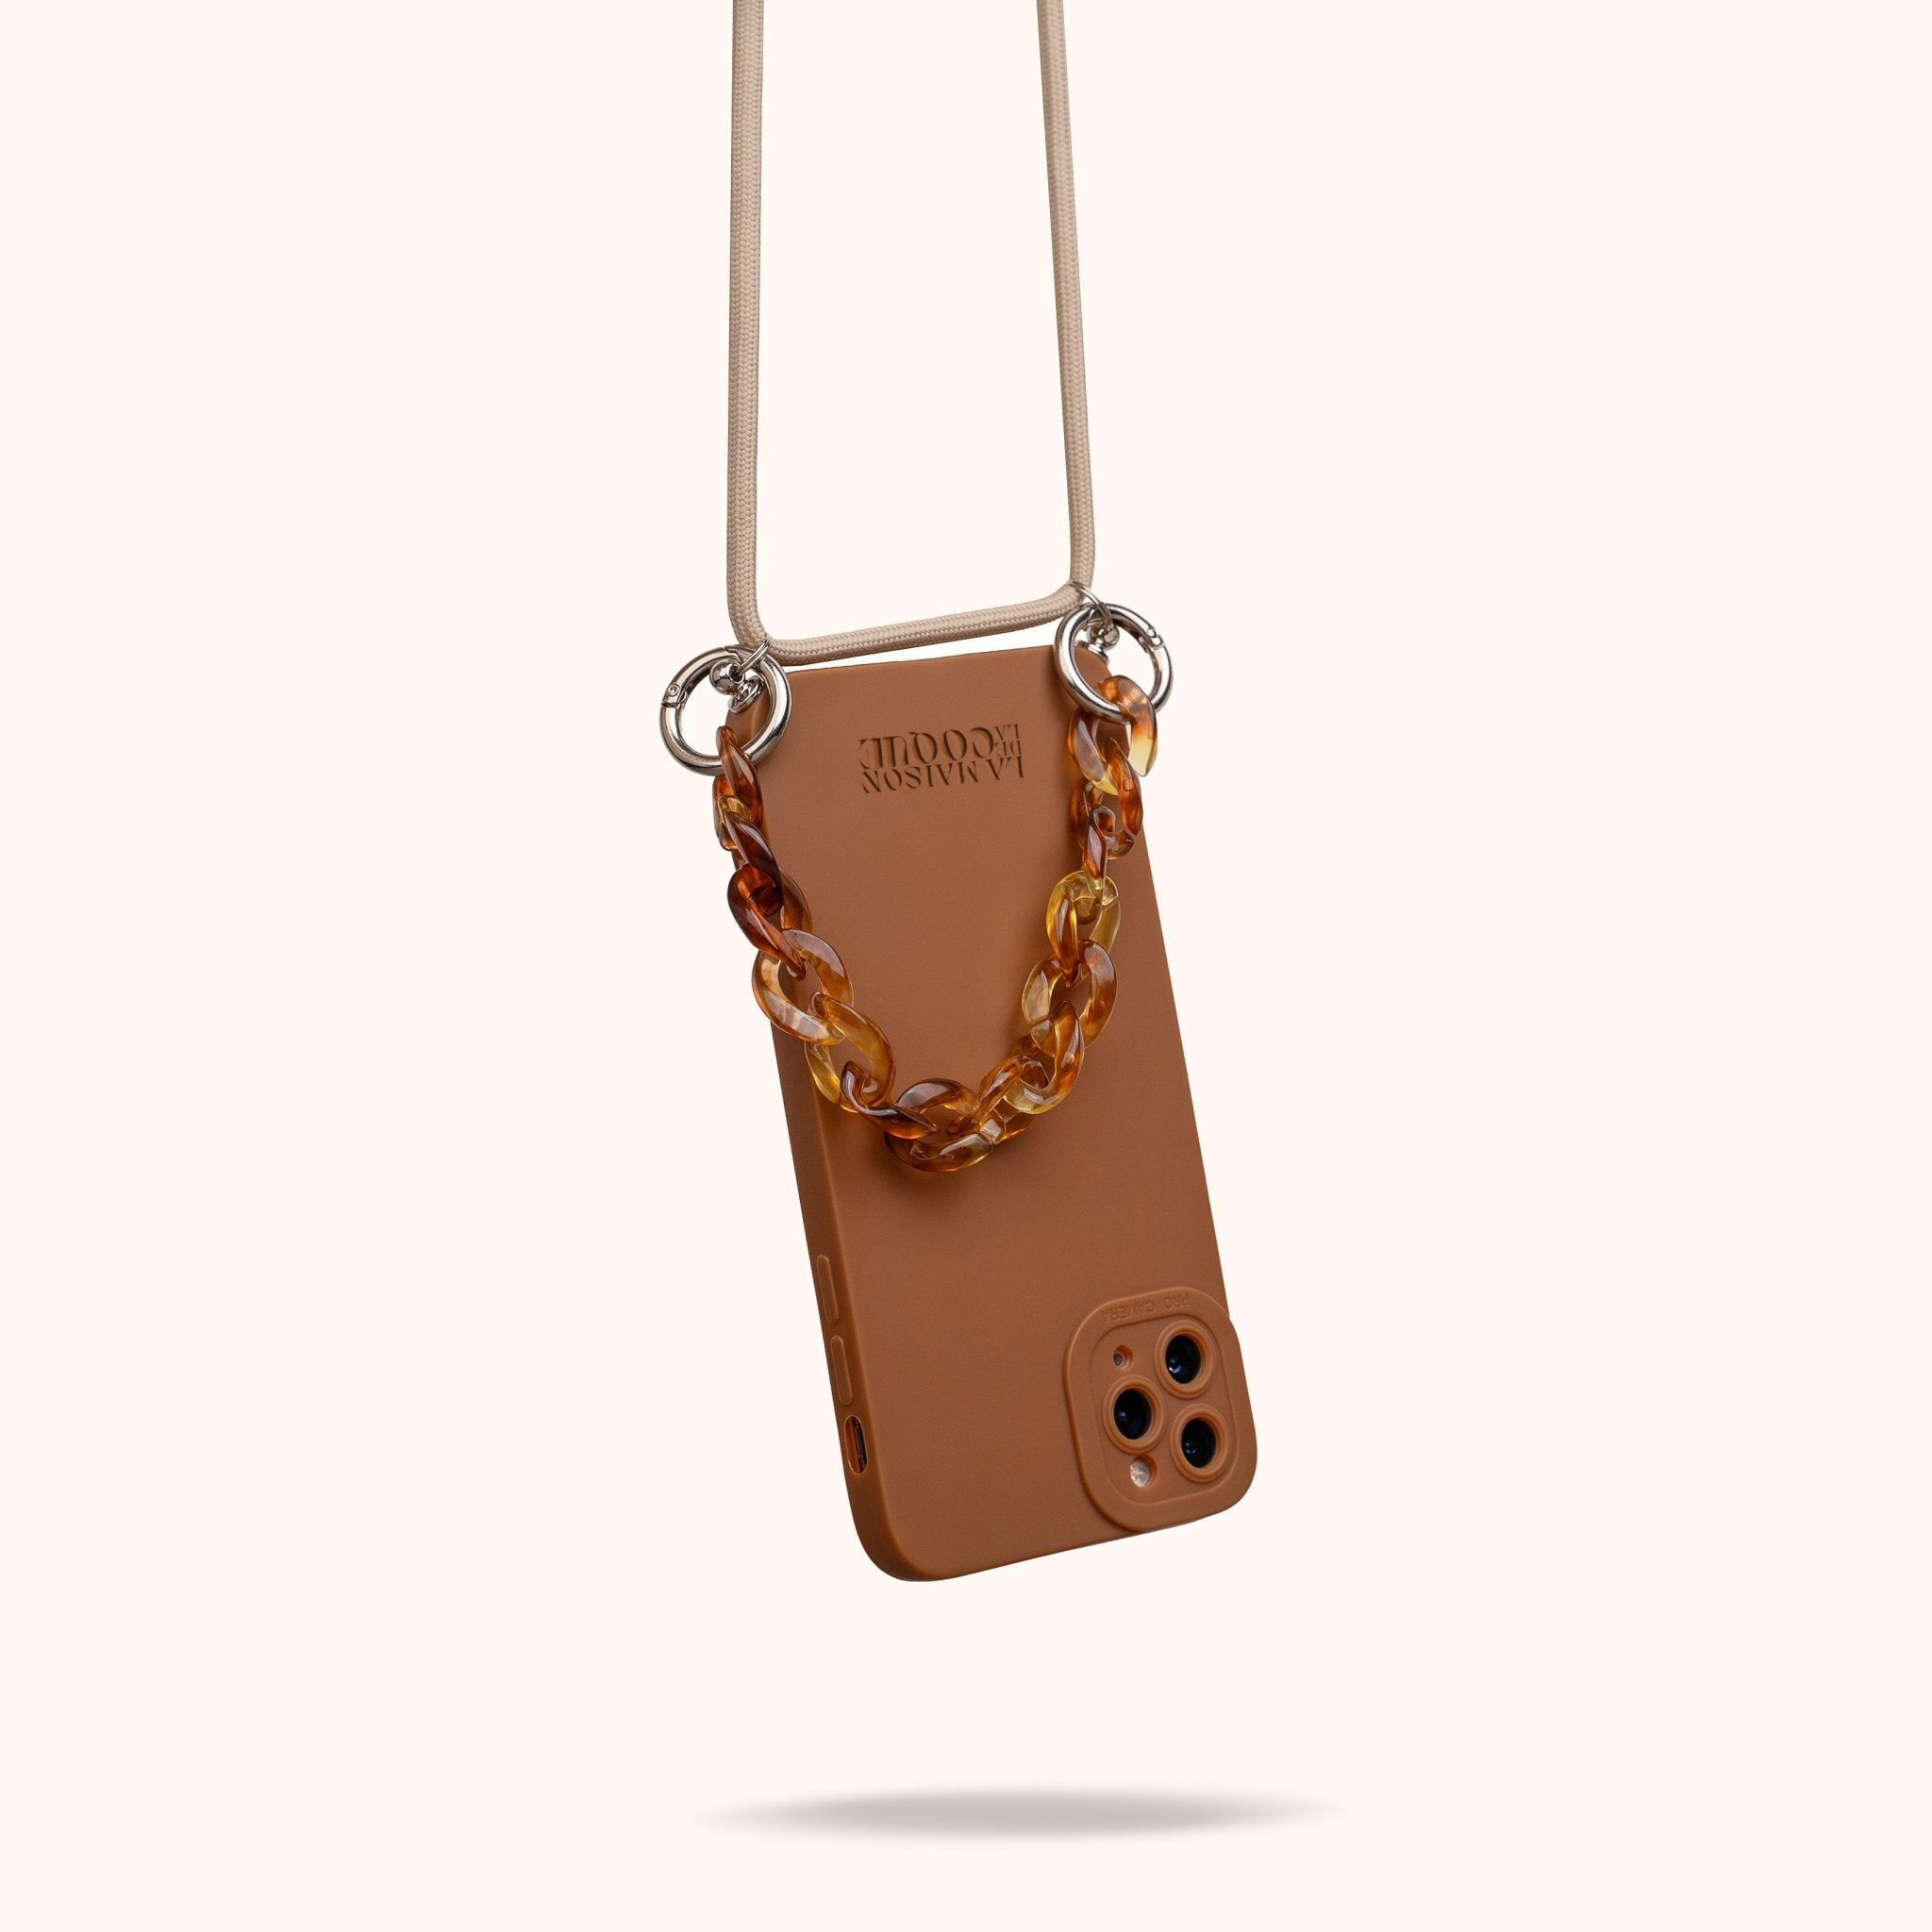 iPhone Strap Case "Amber Camel" - House Of Case